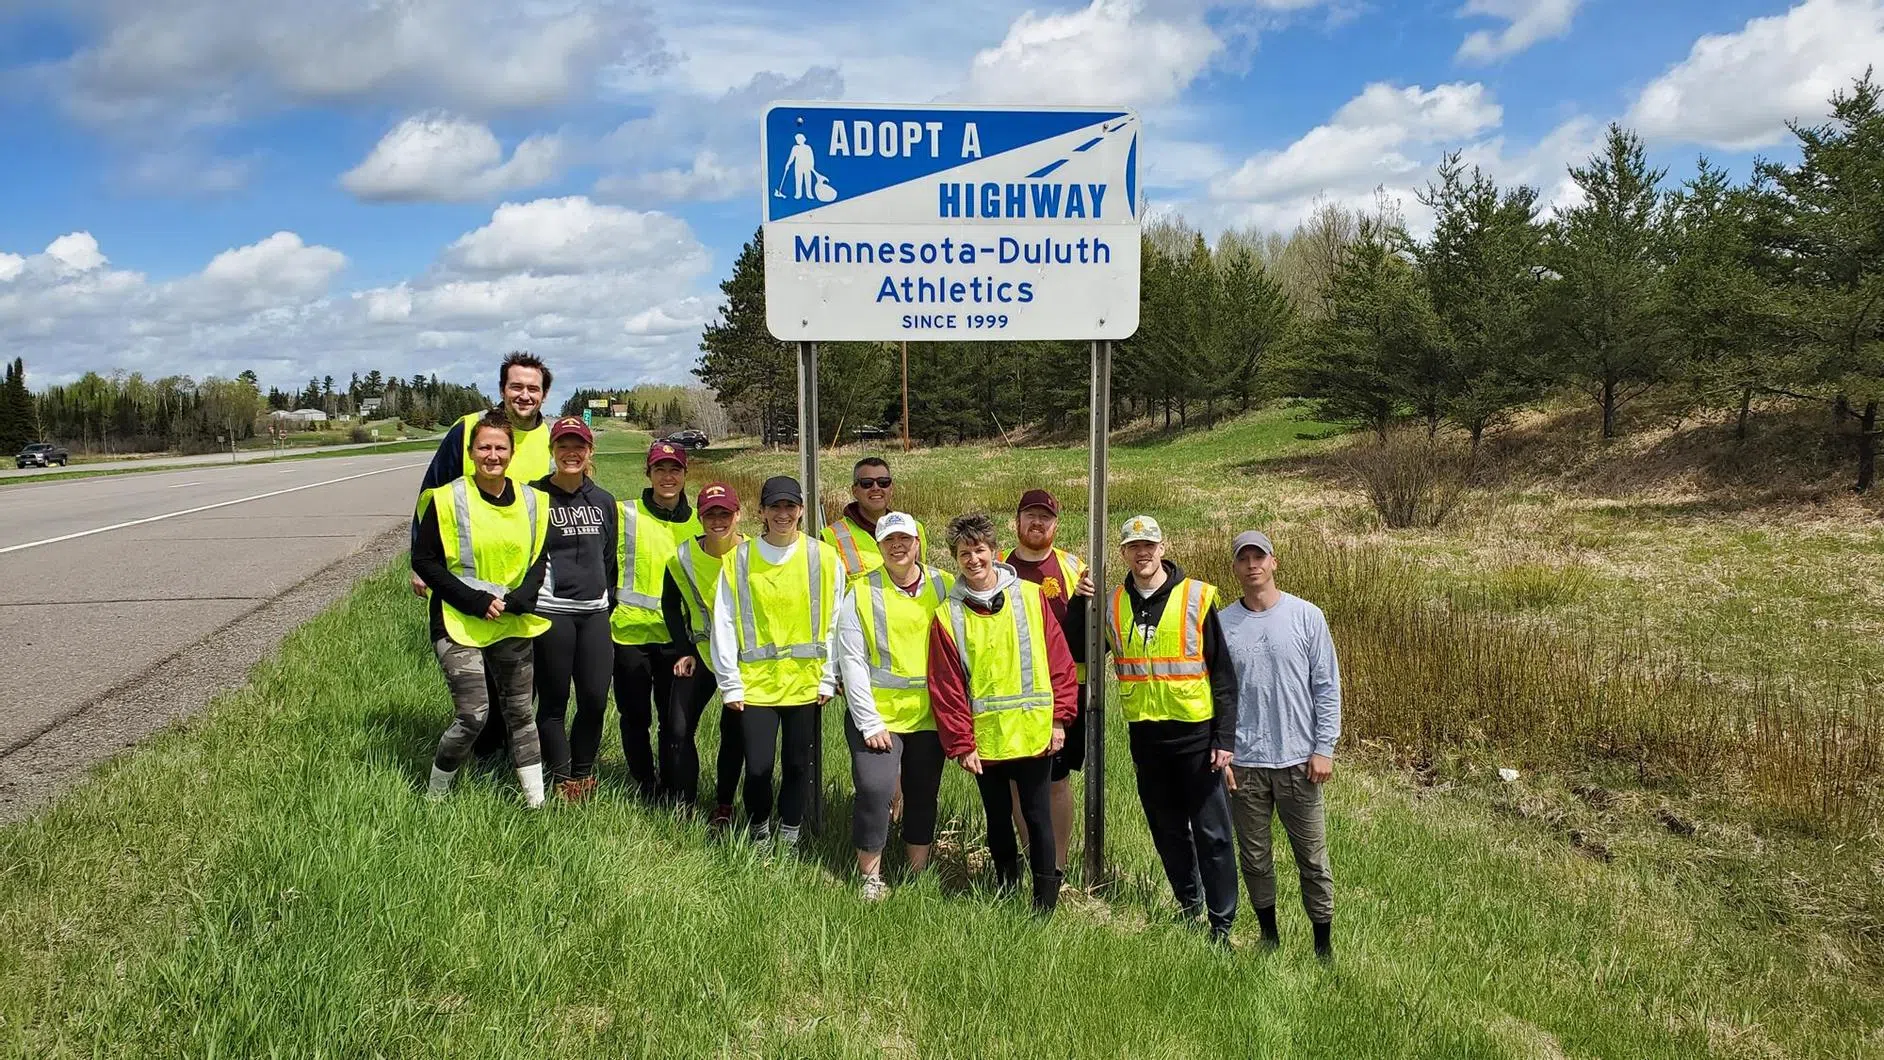 More groups wanted to keep Minnesota highways clean